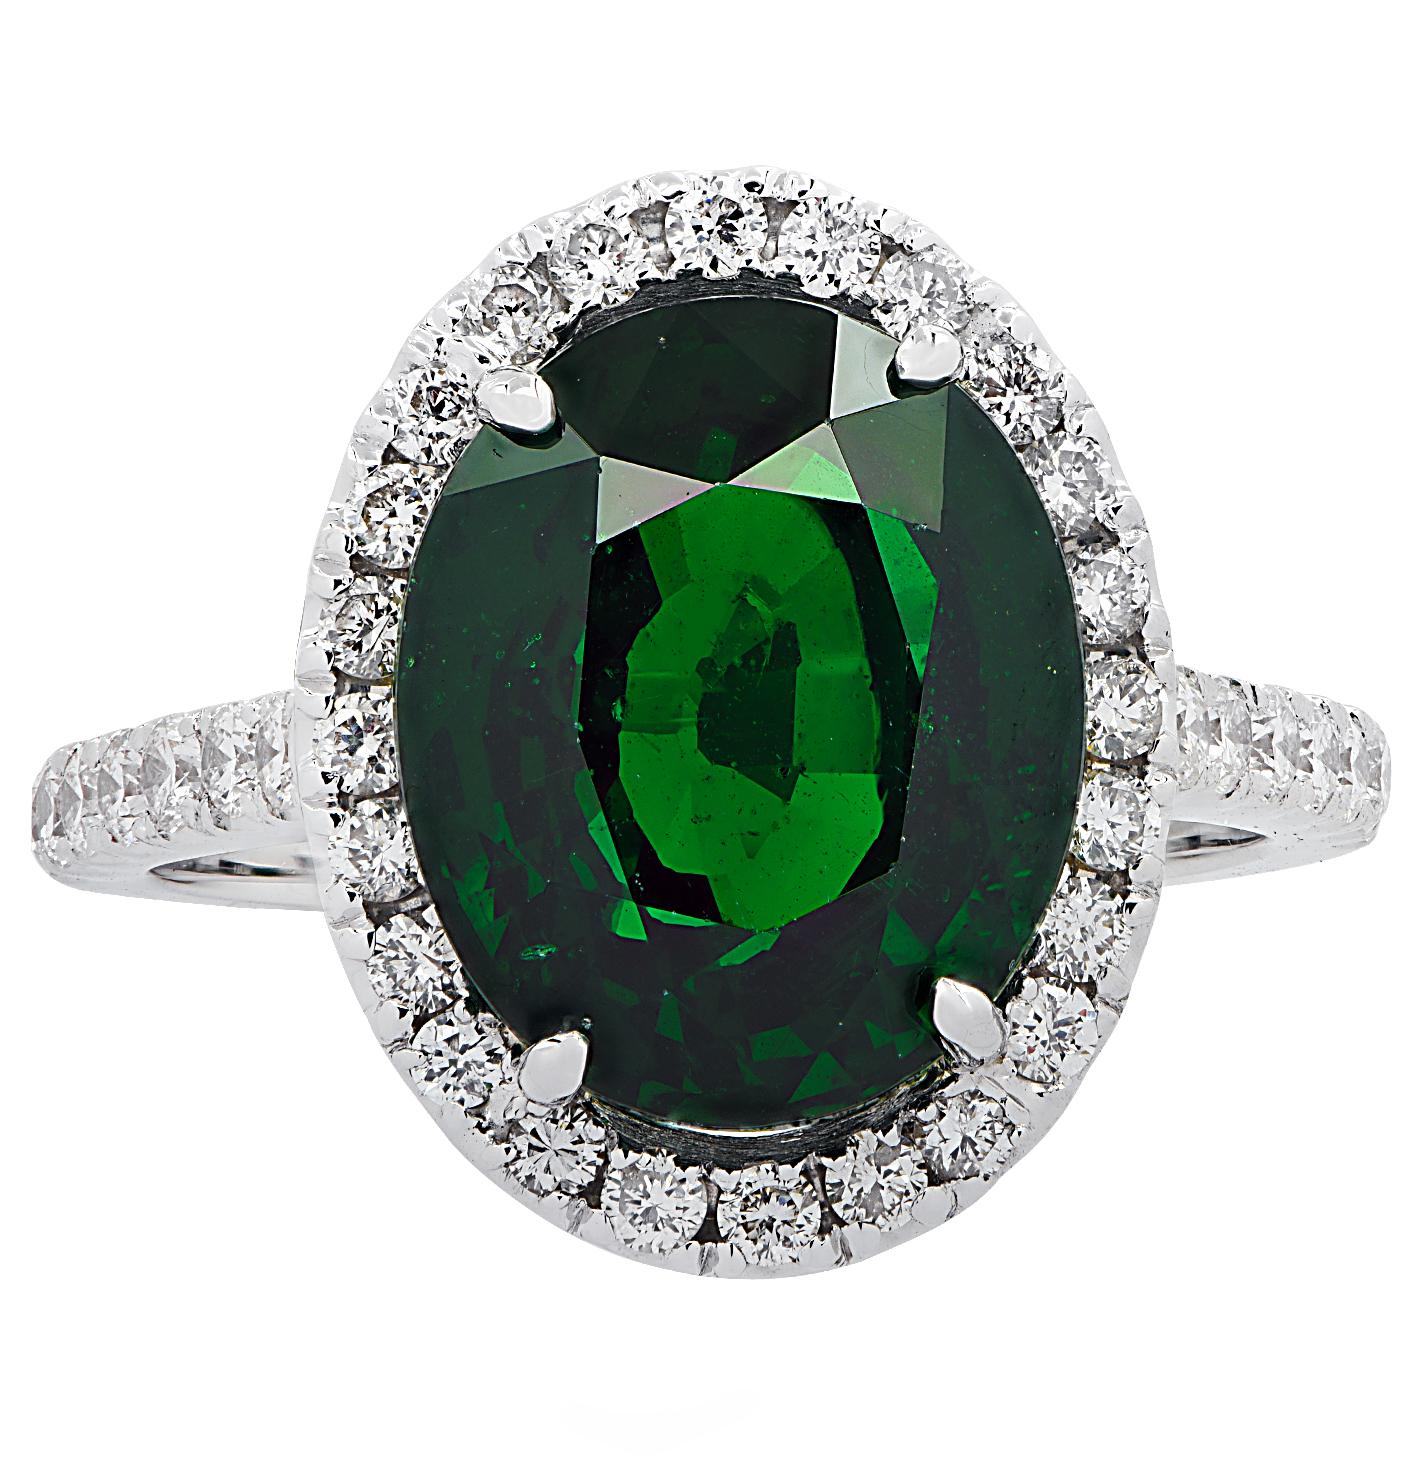 Gorgeous ring crafted in 18 karat white gold, showcasing a beautiful green oval Tsavorite weighing 7.07 carats, adorned with 38 round brilliant cut diamonds weighing approximately .60 carats, G color, VS clarity. The Tsavorite takes center stage in